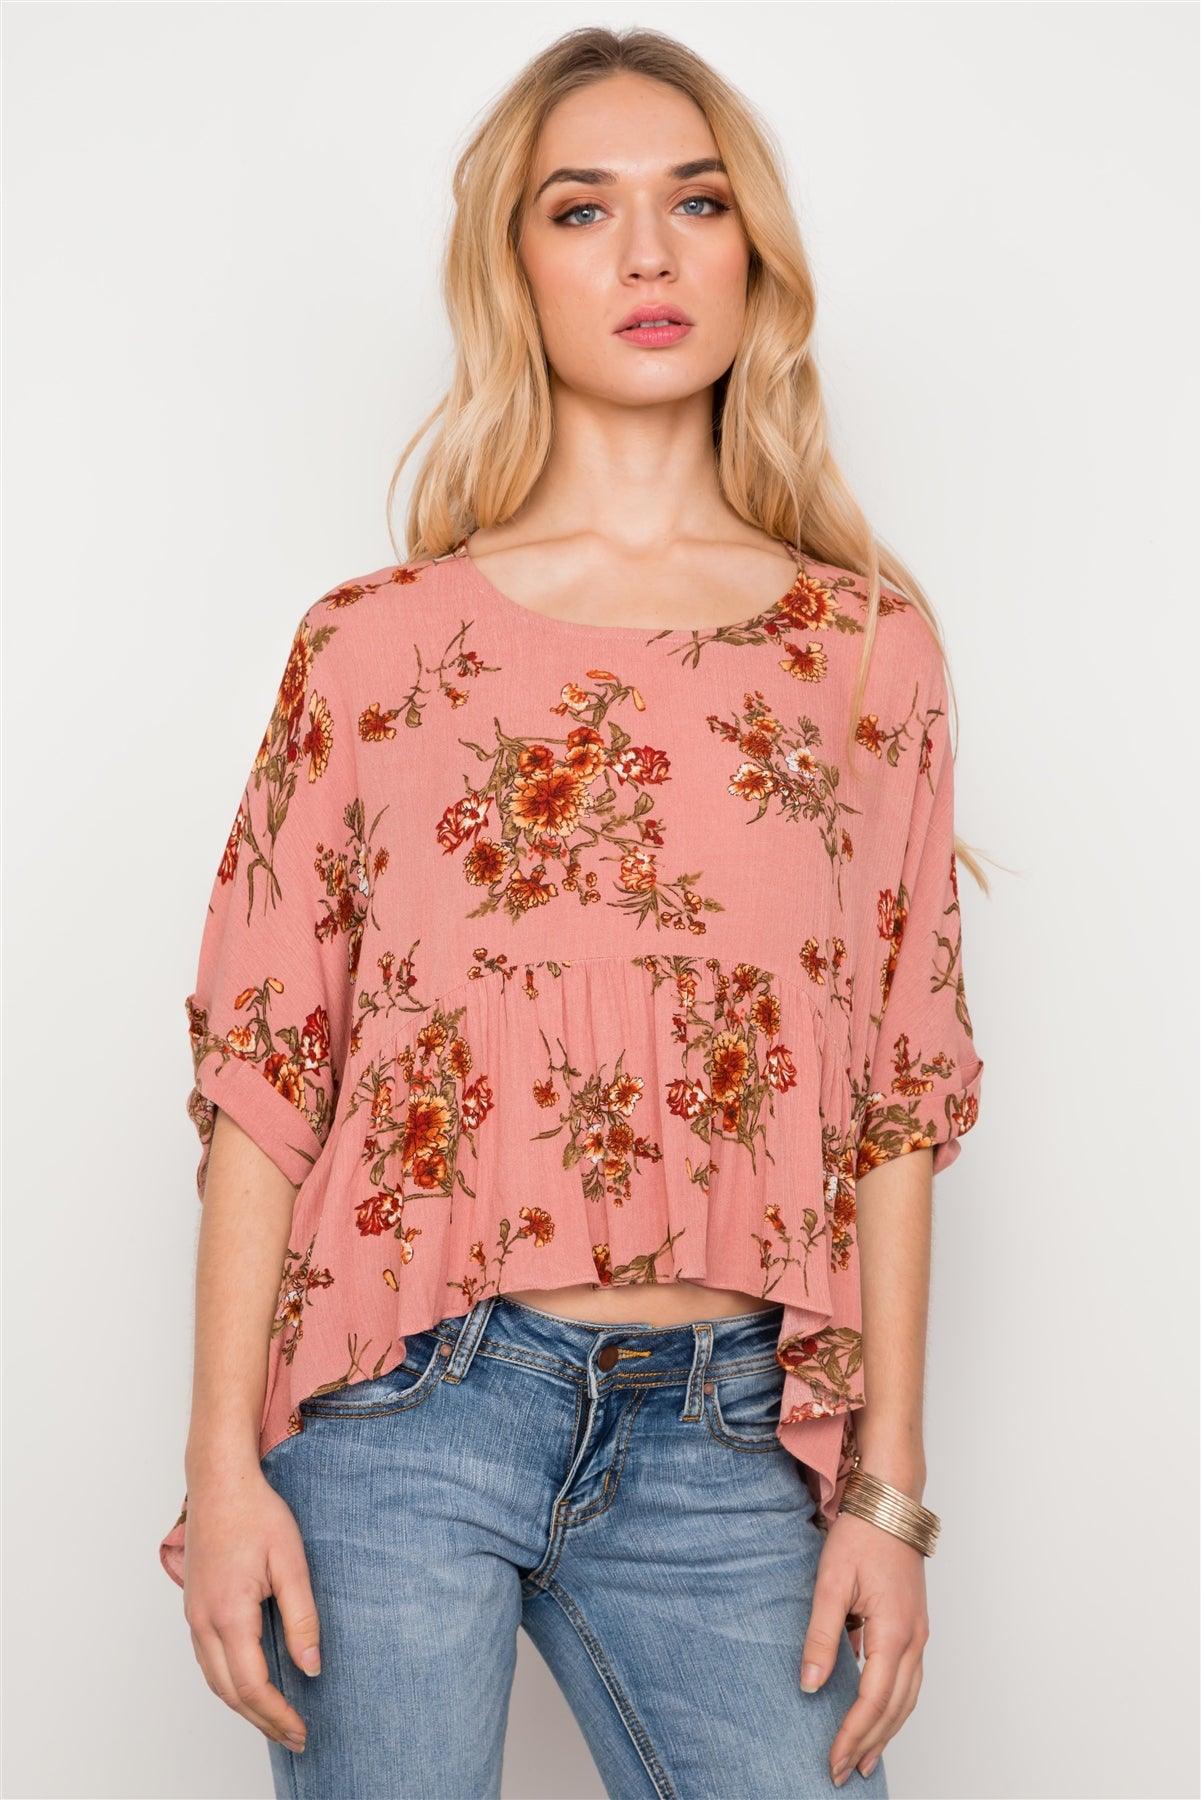 Floral Multi Peach High Low Round Neck Top /3-2-1